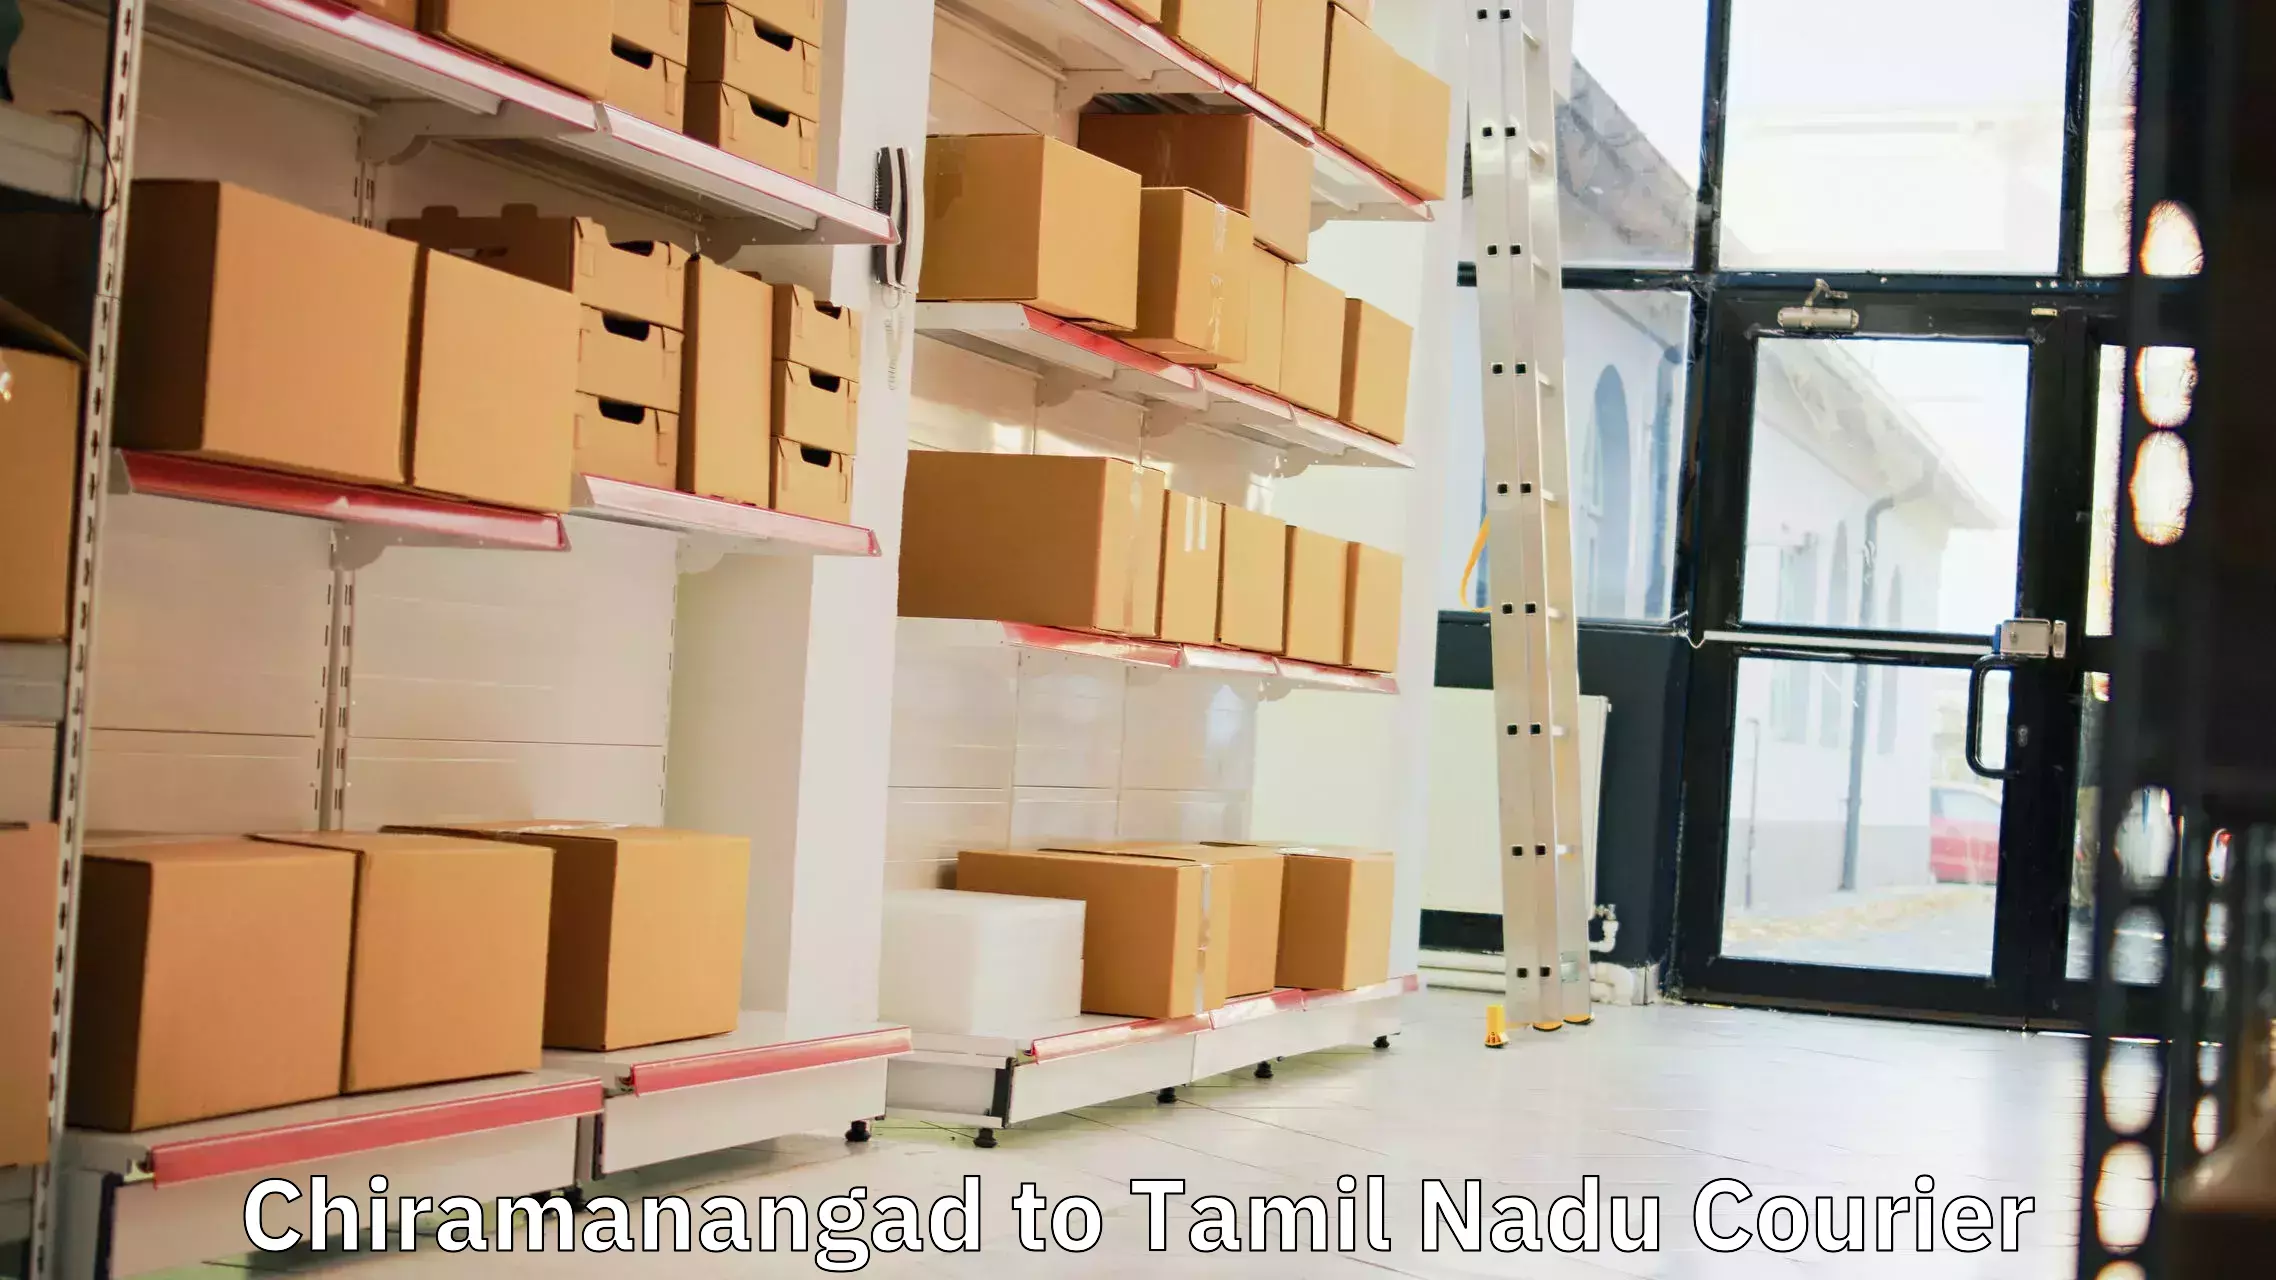 Efficient parcel delivery Chiramanangad to Ennore Port Chennai